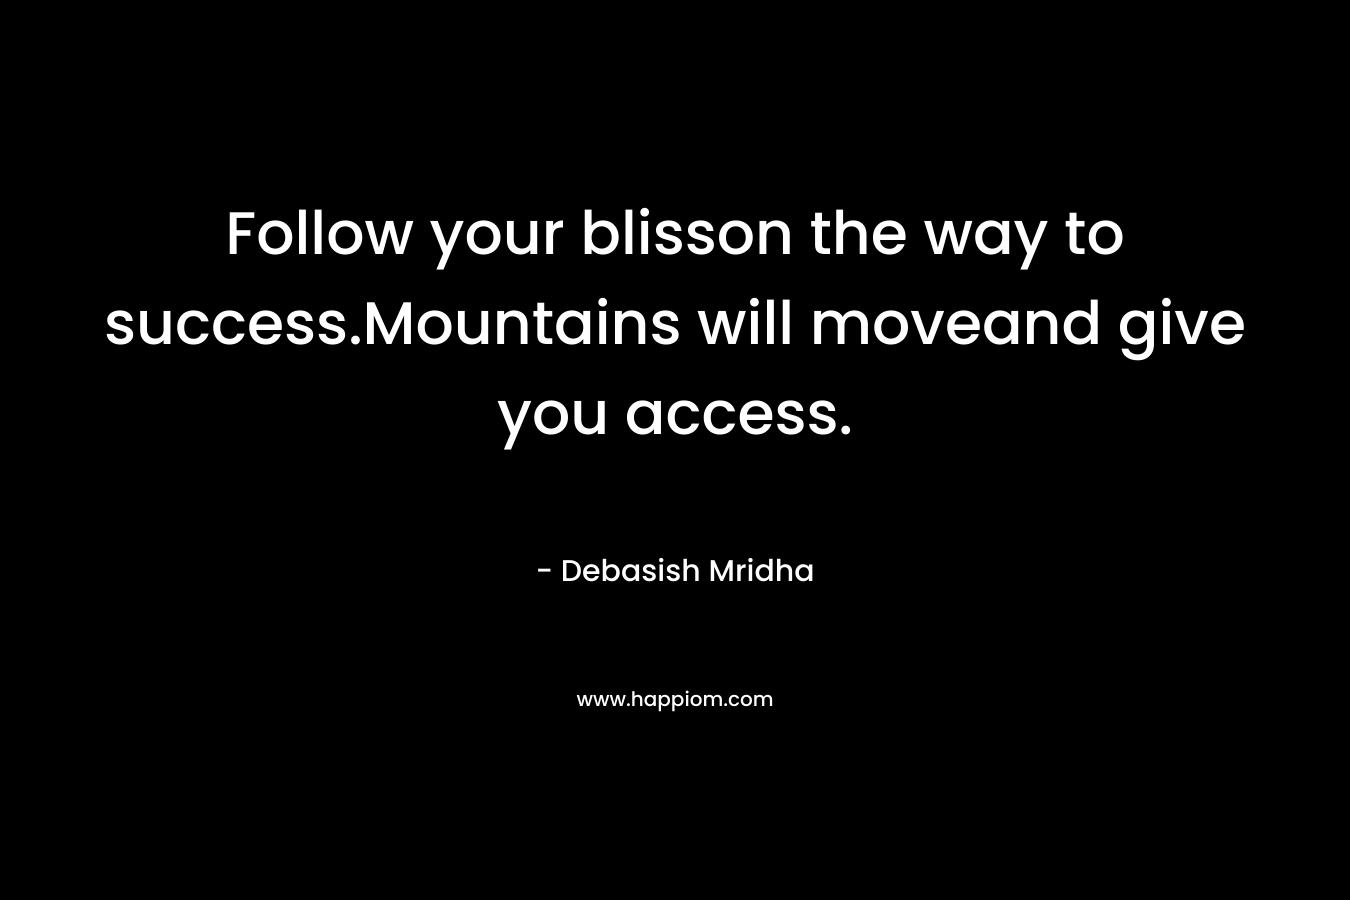 Follow your blisson the way to success.Mountains will moveand give you access.